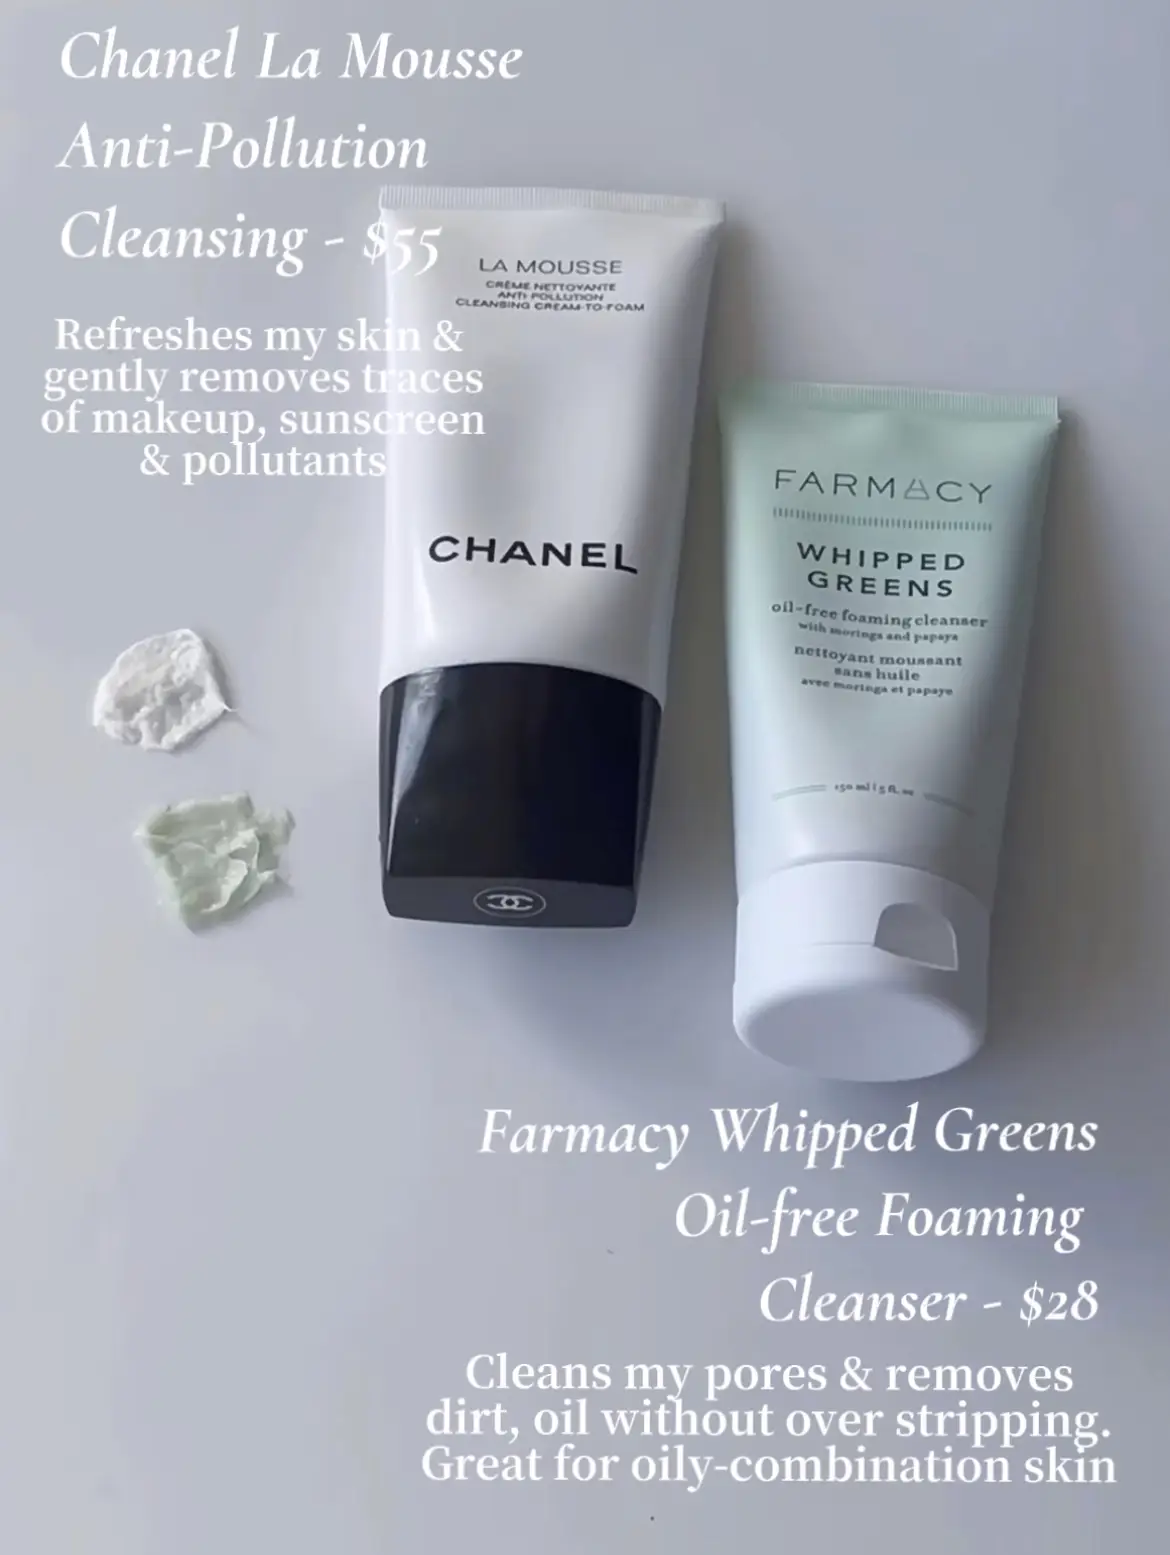 ⭐Review Foaming Cleanser Dior and Chanel Twin Different Lid